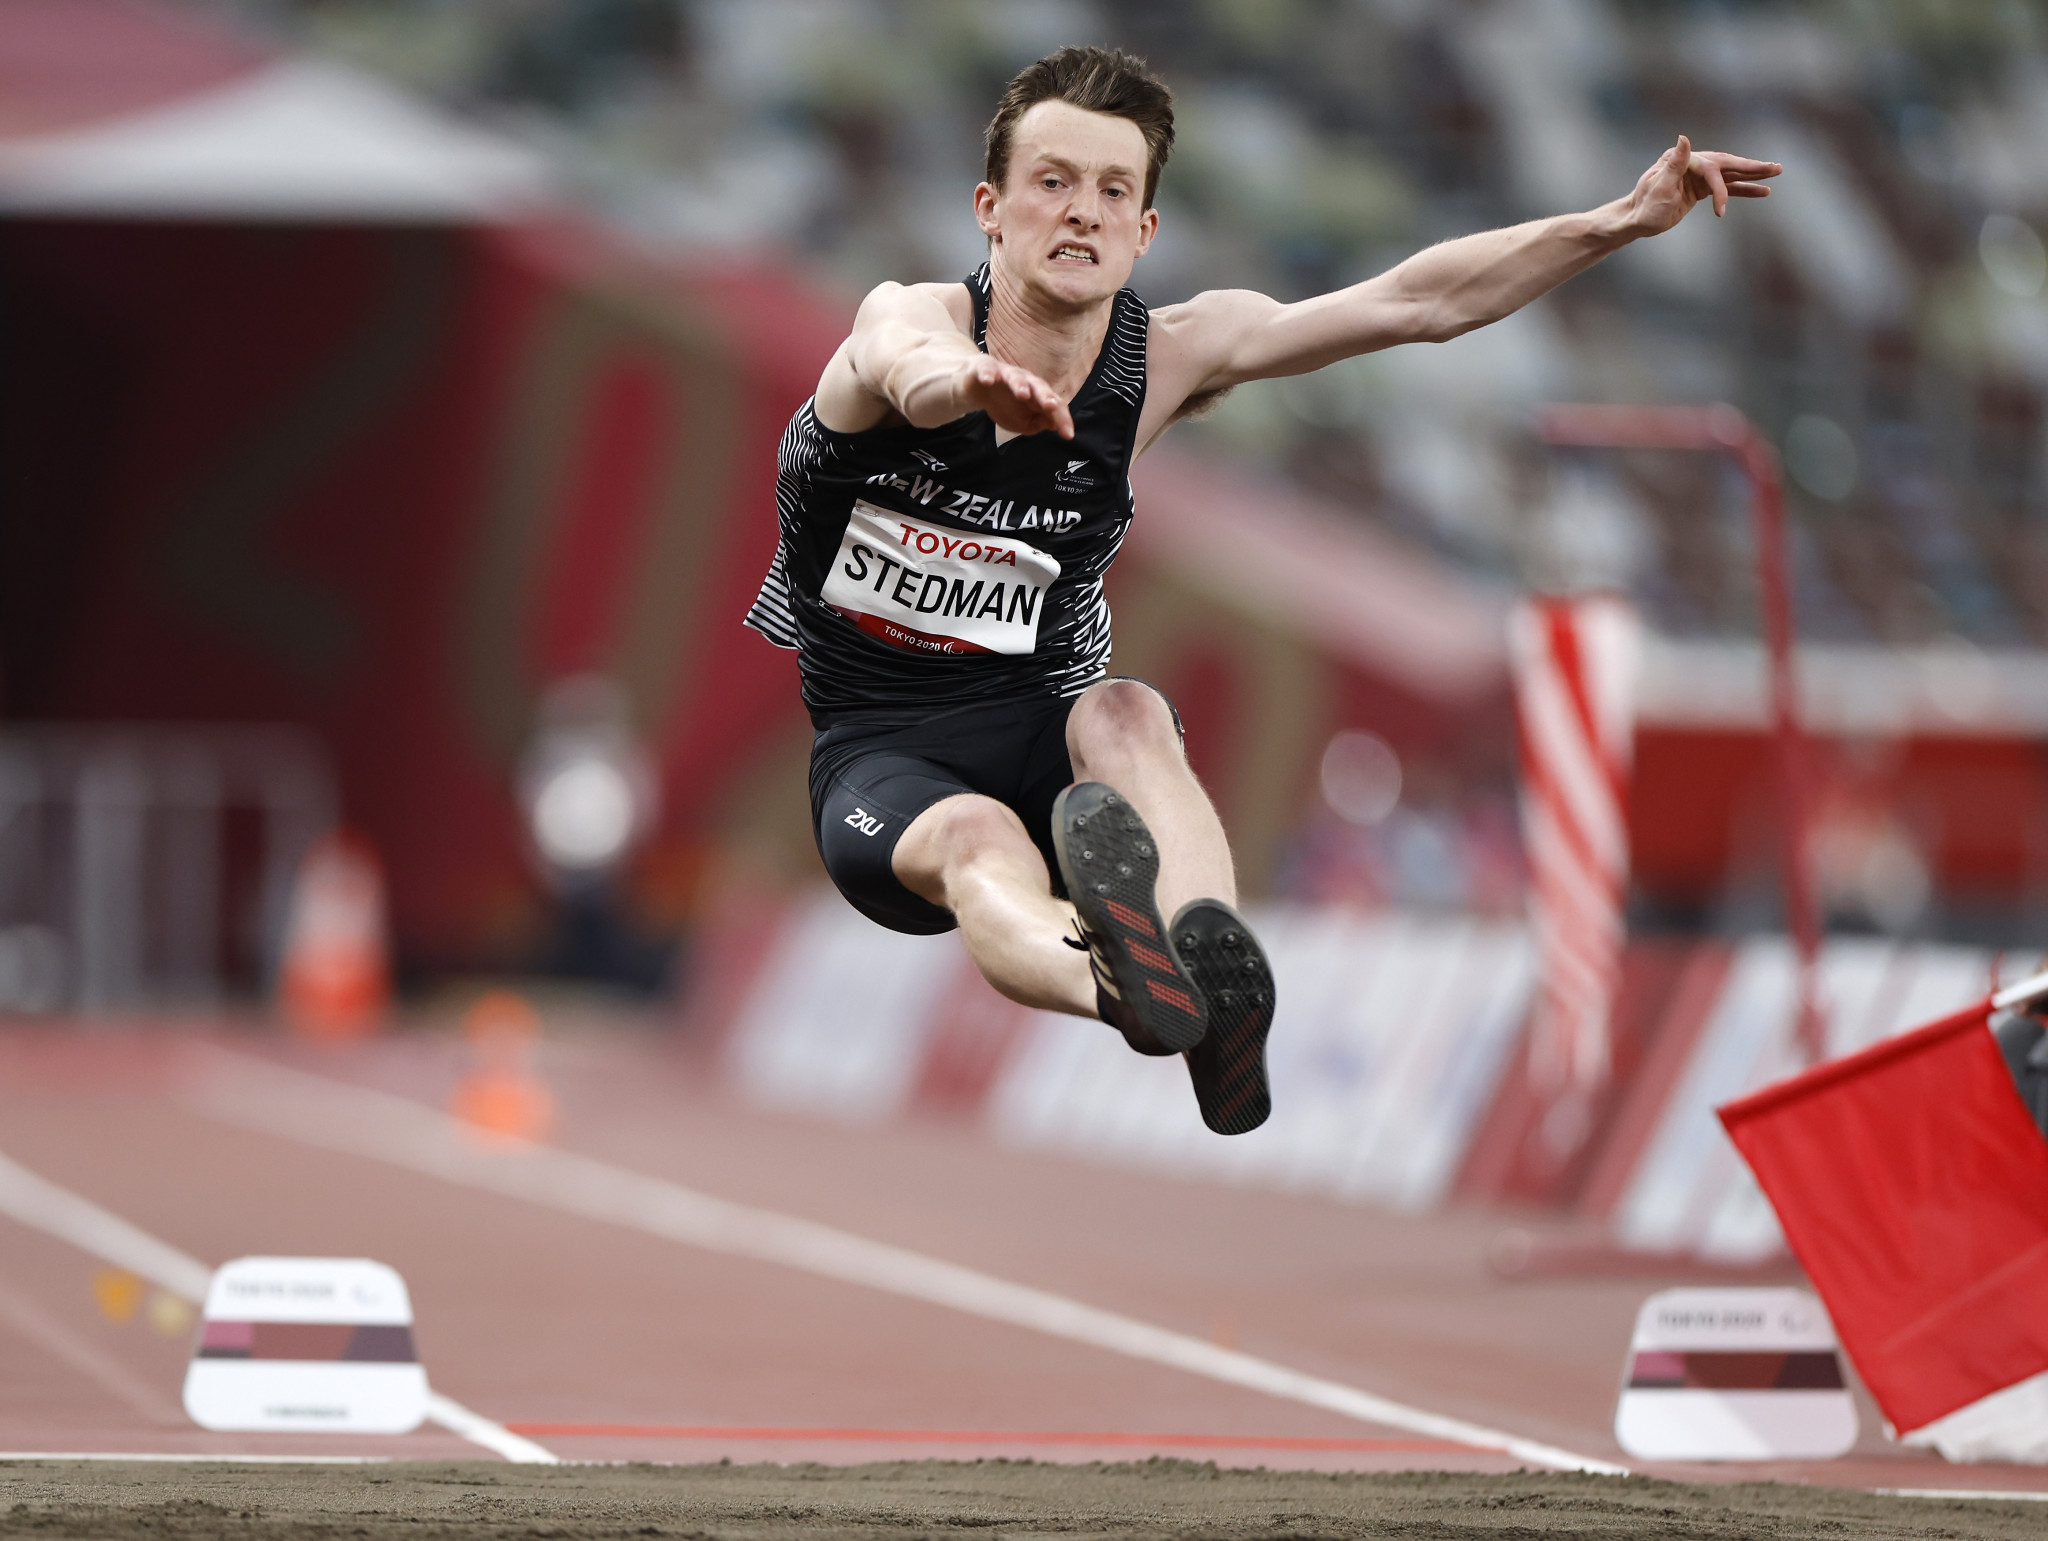 William Stedman who won silver in the men’s long jump T36 and bronze in the men’s 400 metres T36, has been recognised by Paralympics New Zealand ©Getty Images